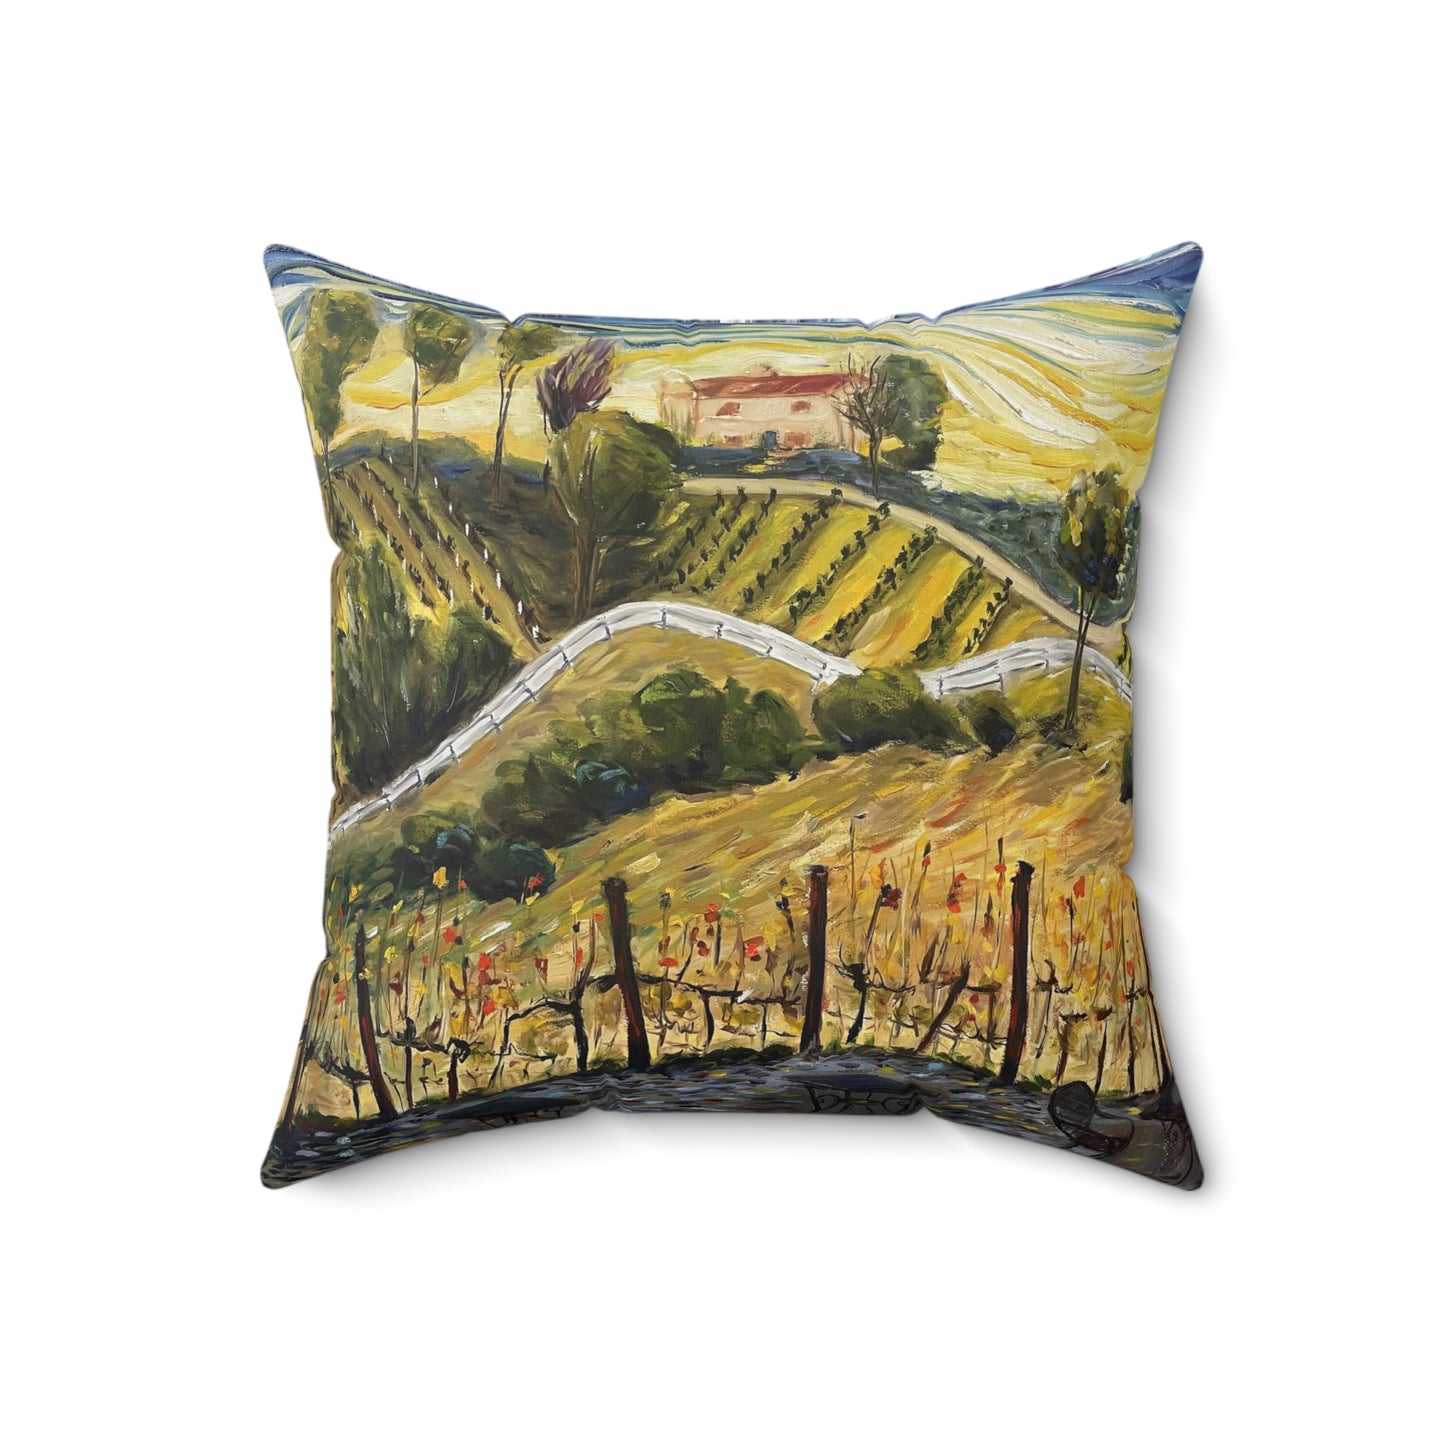 Sunset at the Villa GBV Indoor Spun Polyester Square Pillow